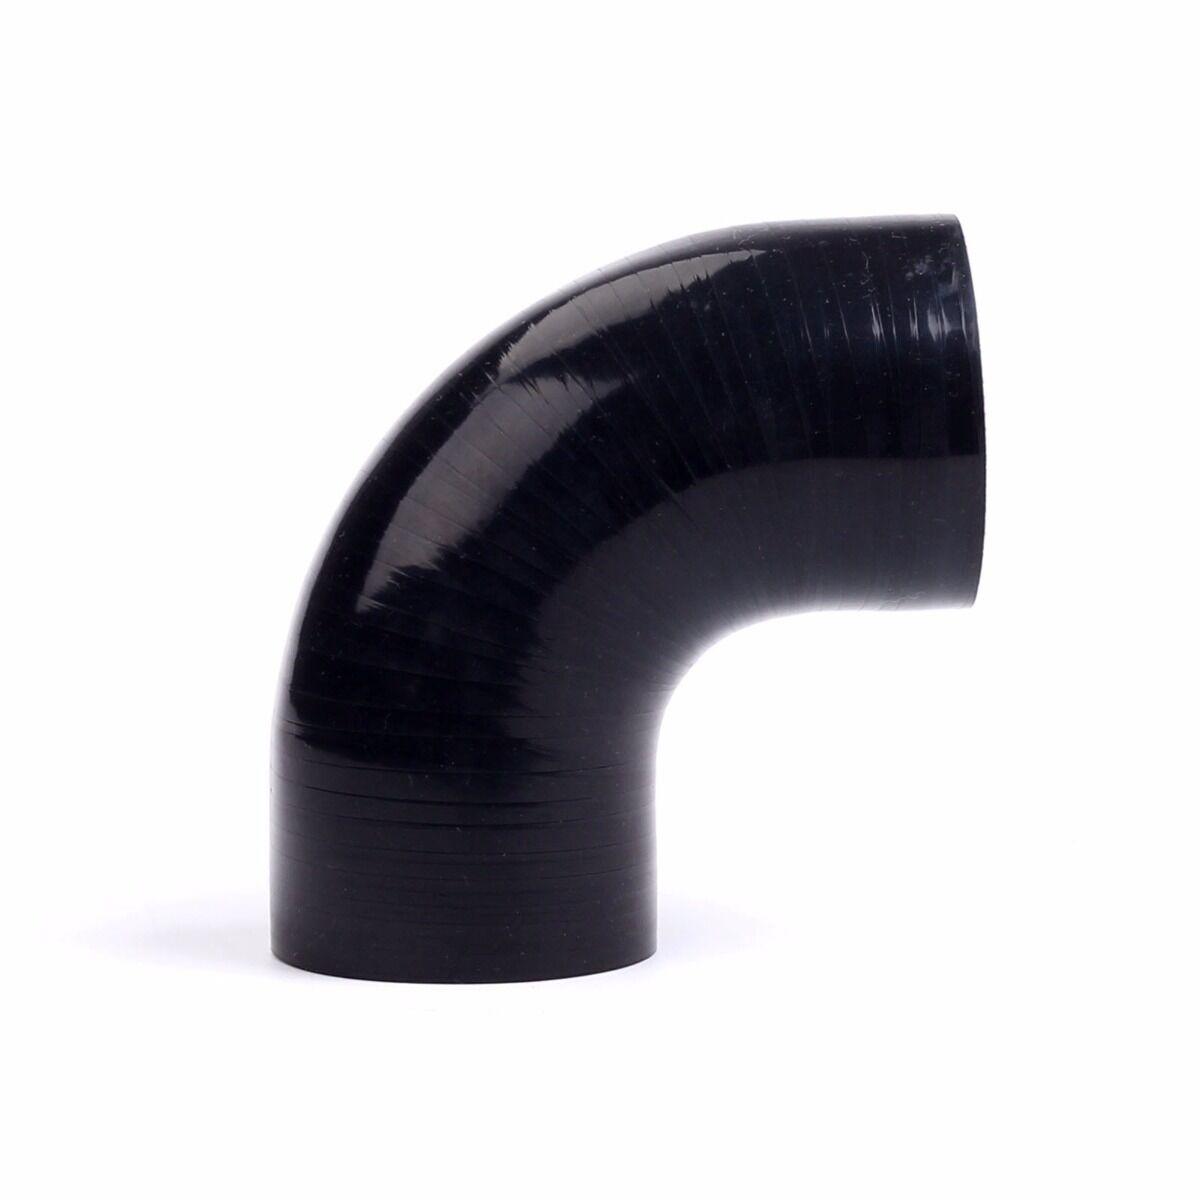 45mm 1 3/4" 1 3/4 inch 90 Degree Silicone Hose Racing Elbow Coupler Pipe Black - www.blackhorse-racing.com